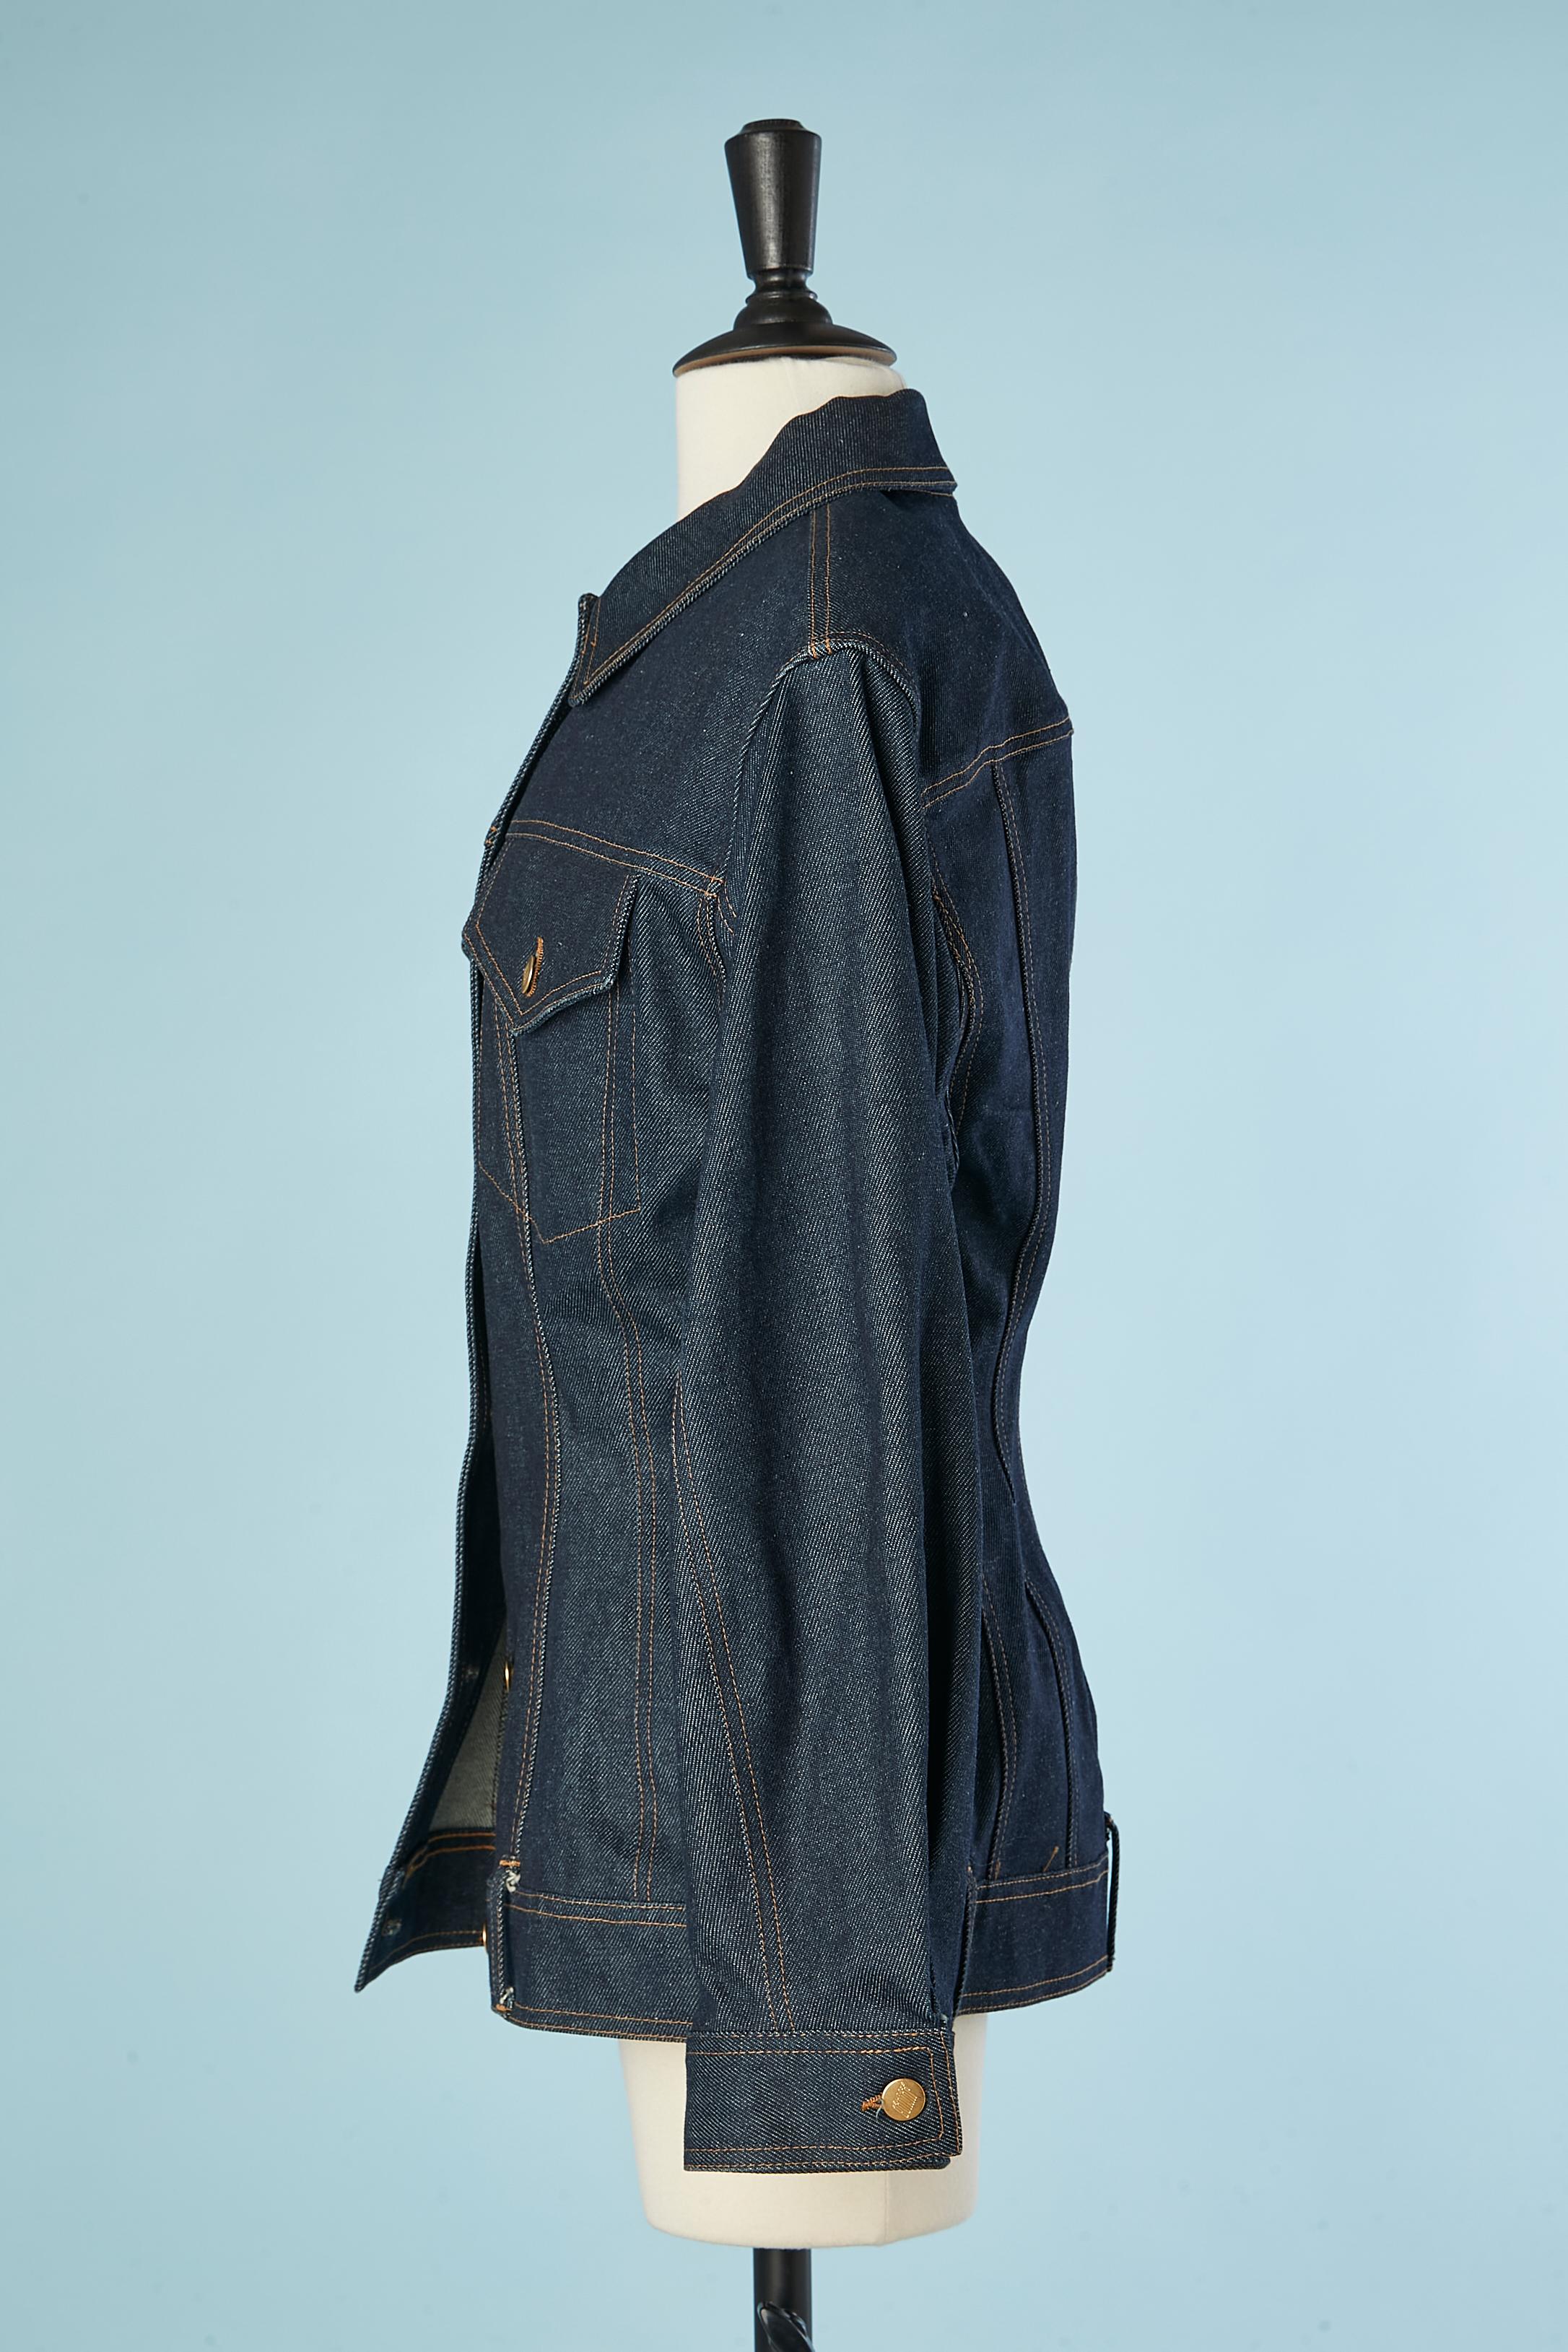 Denim jacket with fitted waist and curved hips Junior Gaultier  1